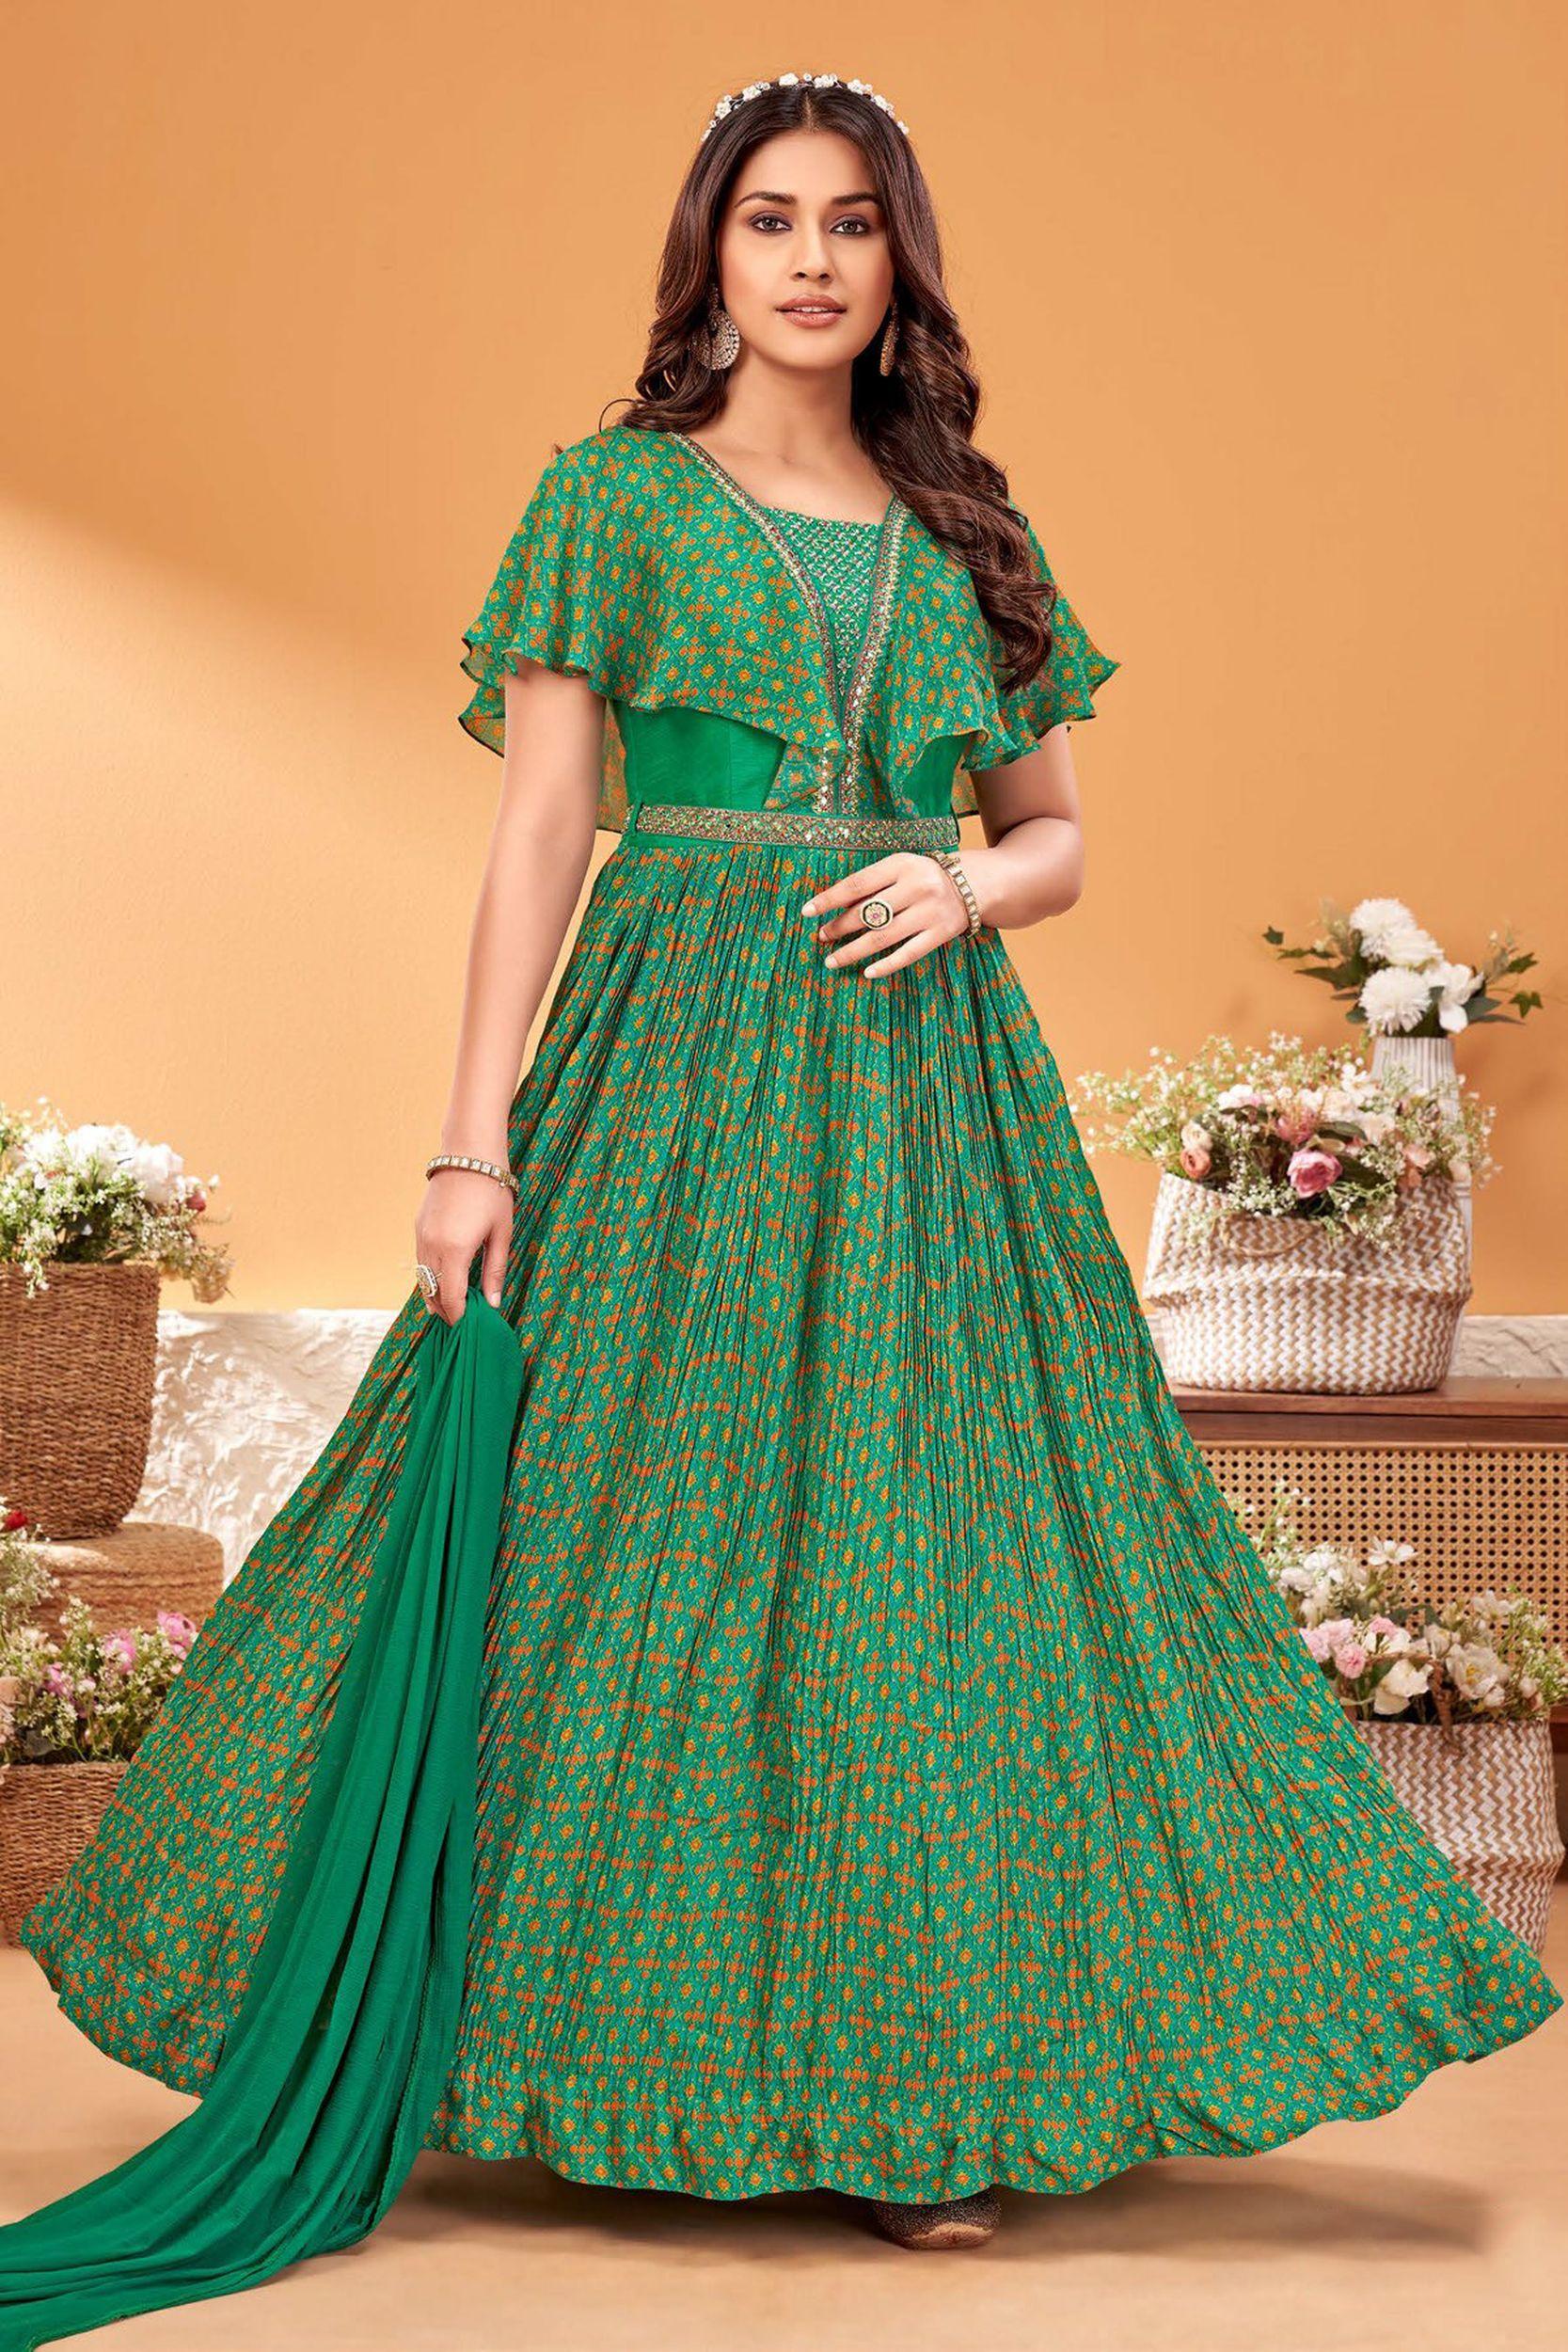 Parrot Green Flared Gown w/ Fabric Origami Triangles – 101 Hues